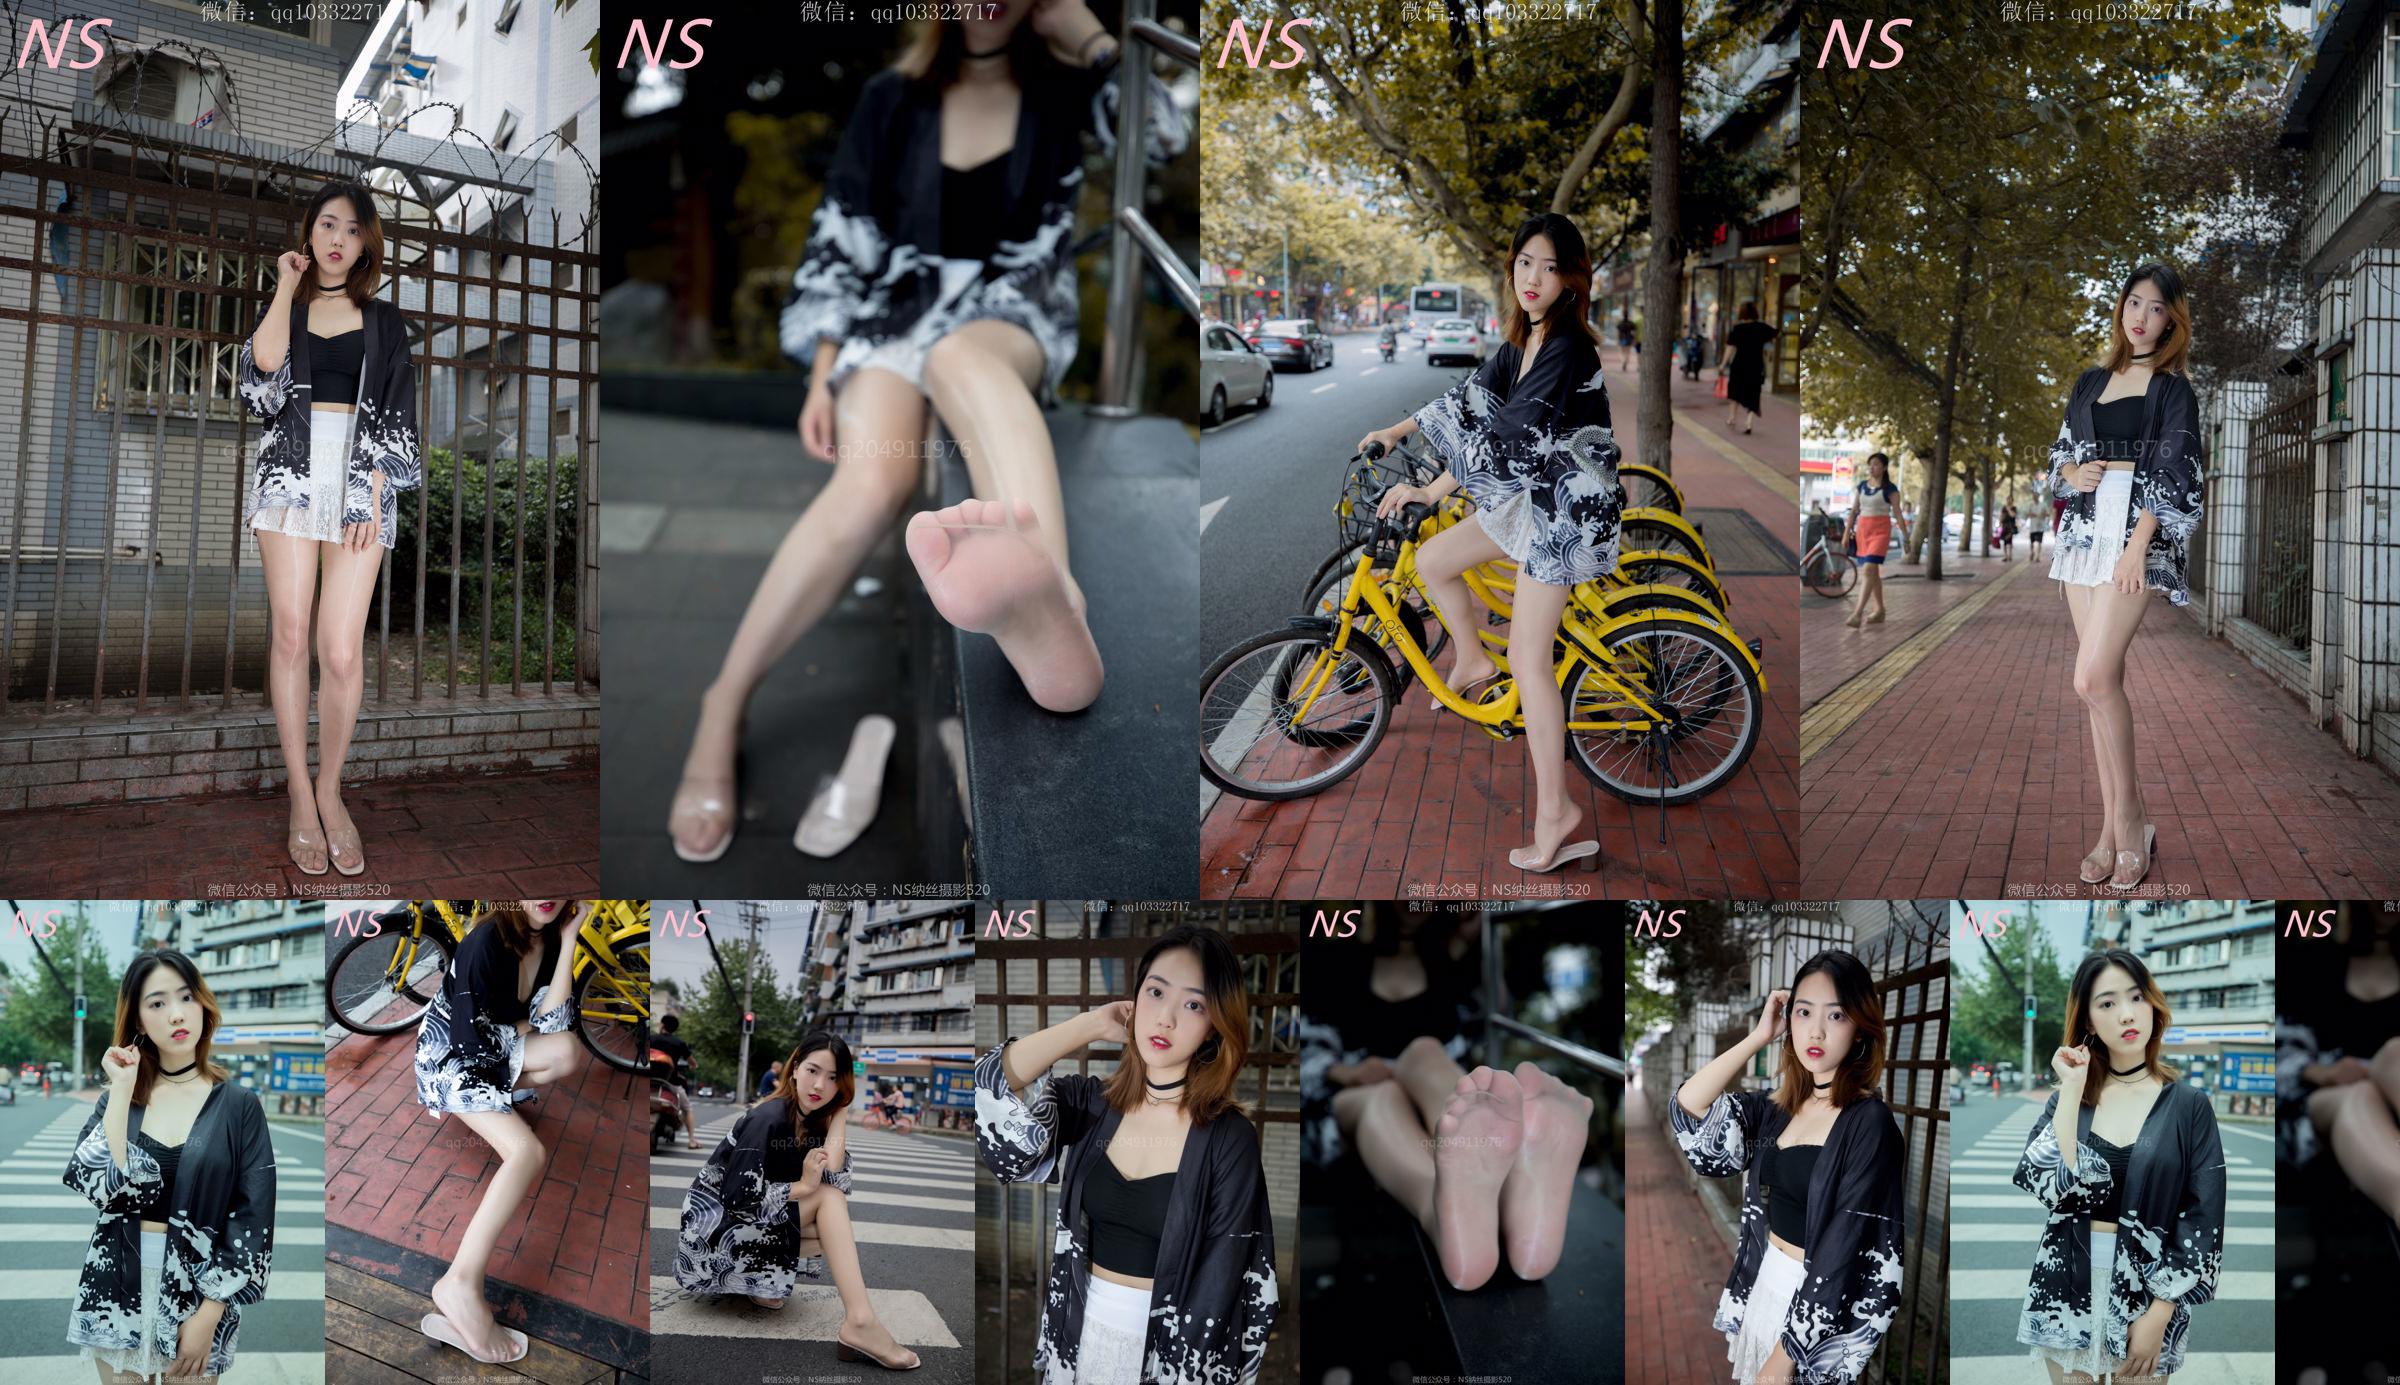 Man Wen "A Trip to a Tricycle in Flesh-colored Stockings and Beautiful Legs" [Nass Photography] No.c3dd9c Page 1